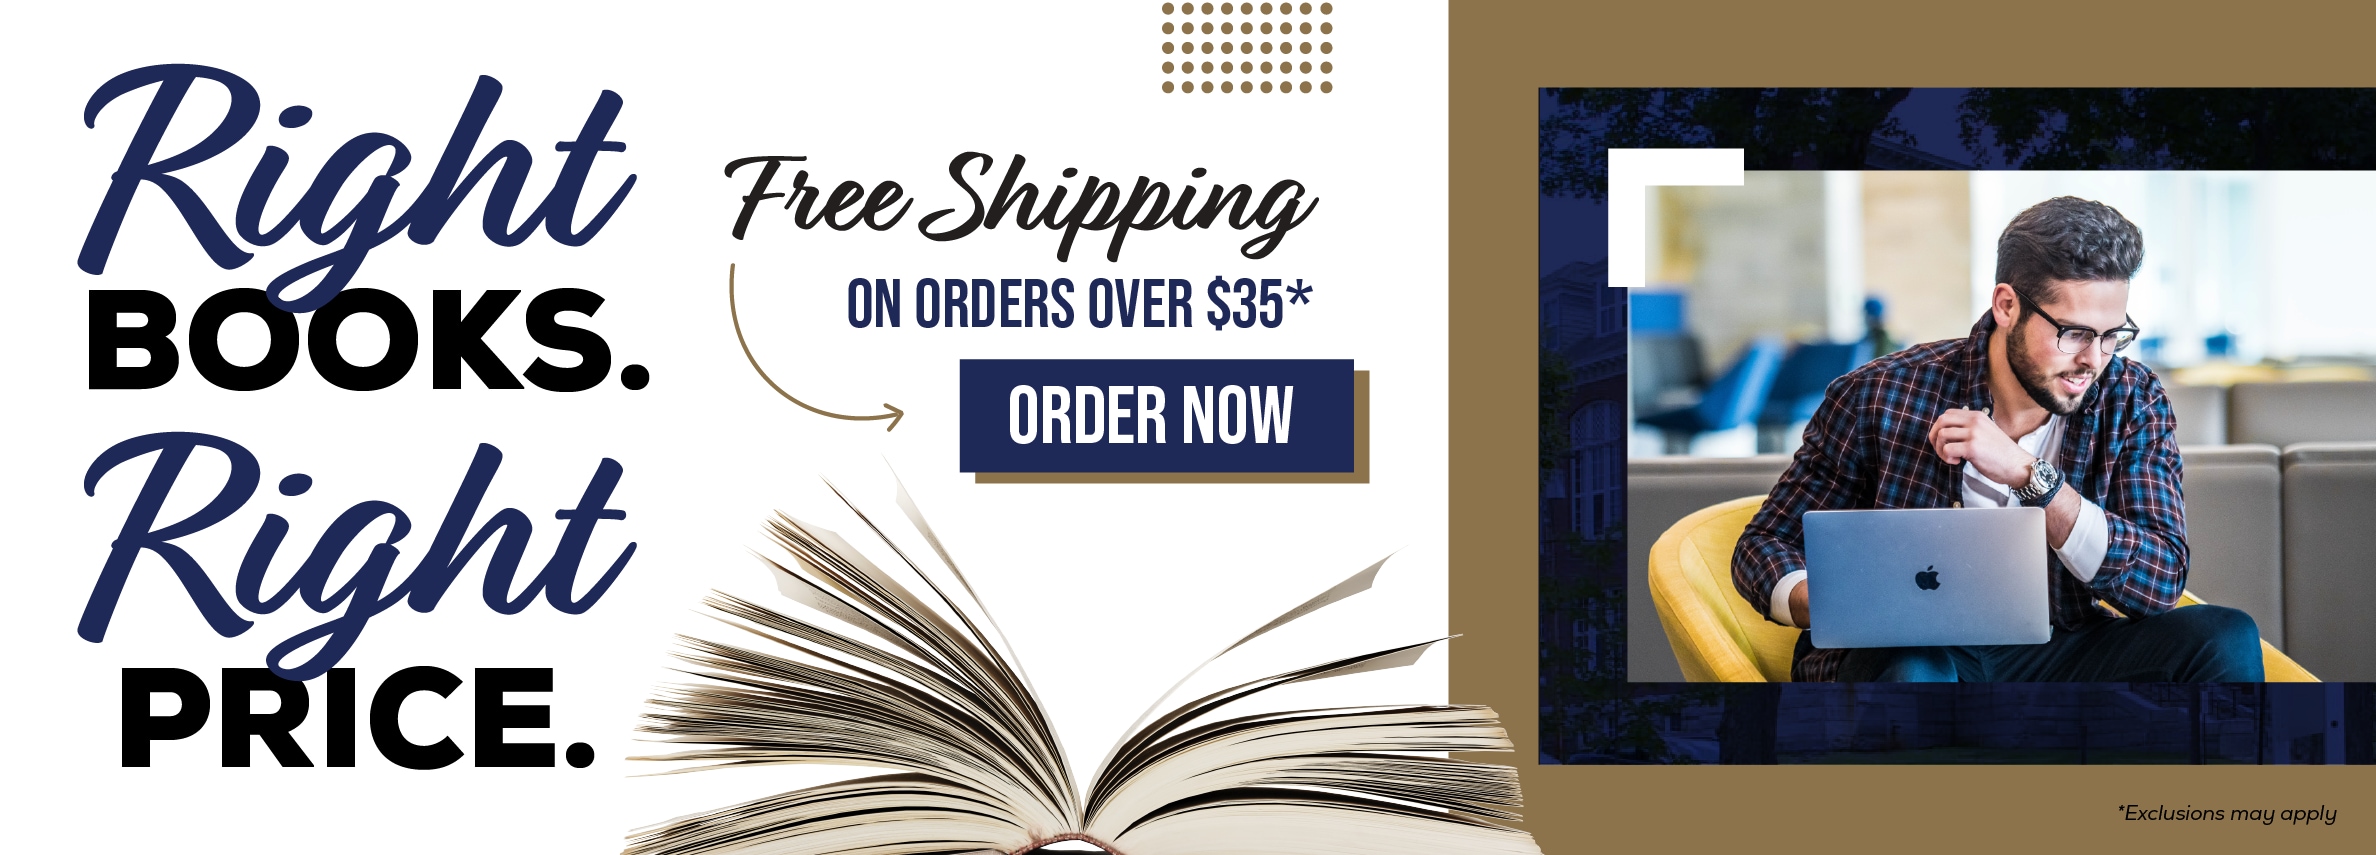 Right books. Right price. Free shipping on orders over $35.* Order now. *Exclusions may apply.